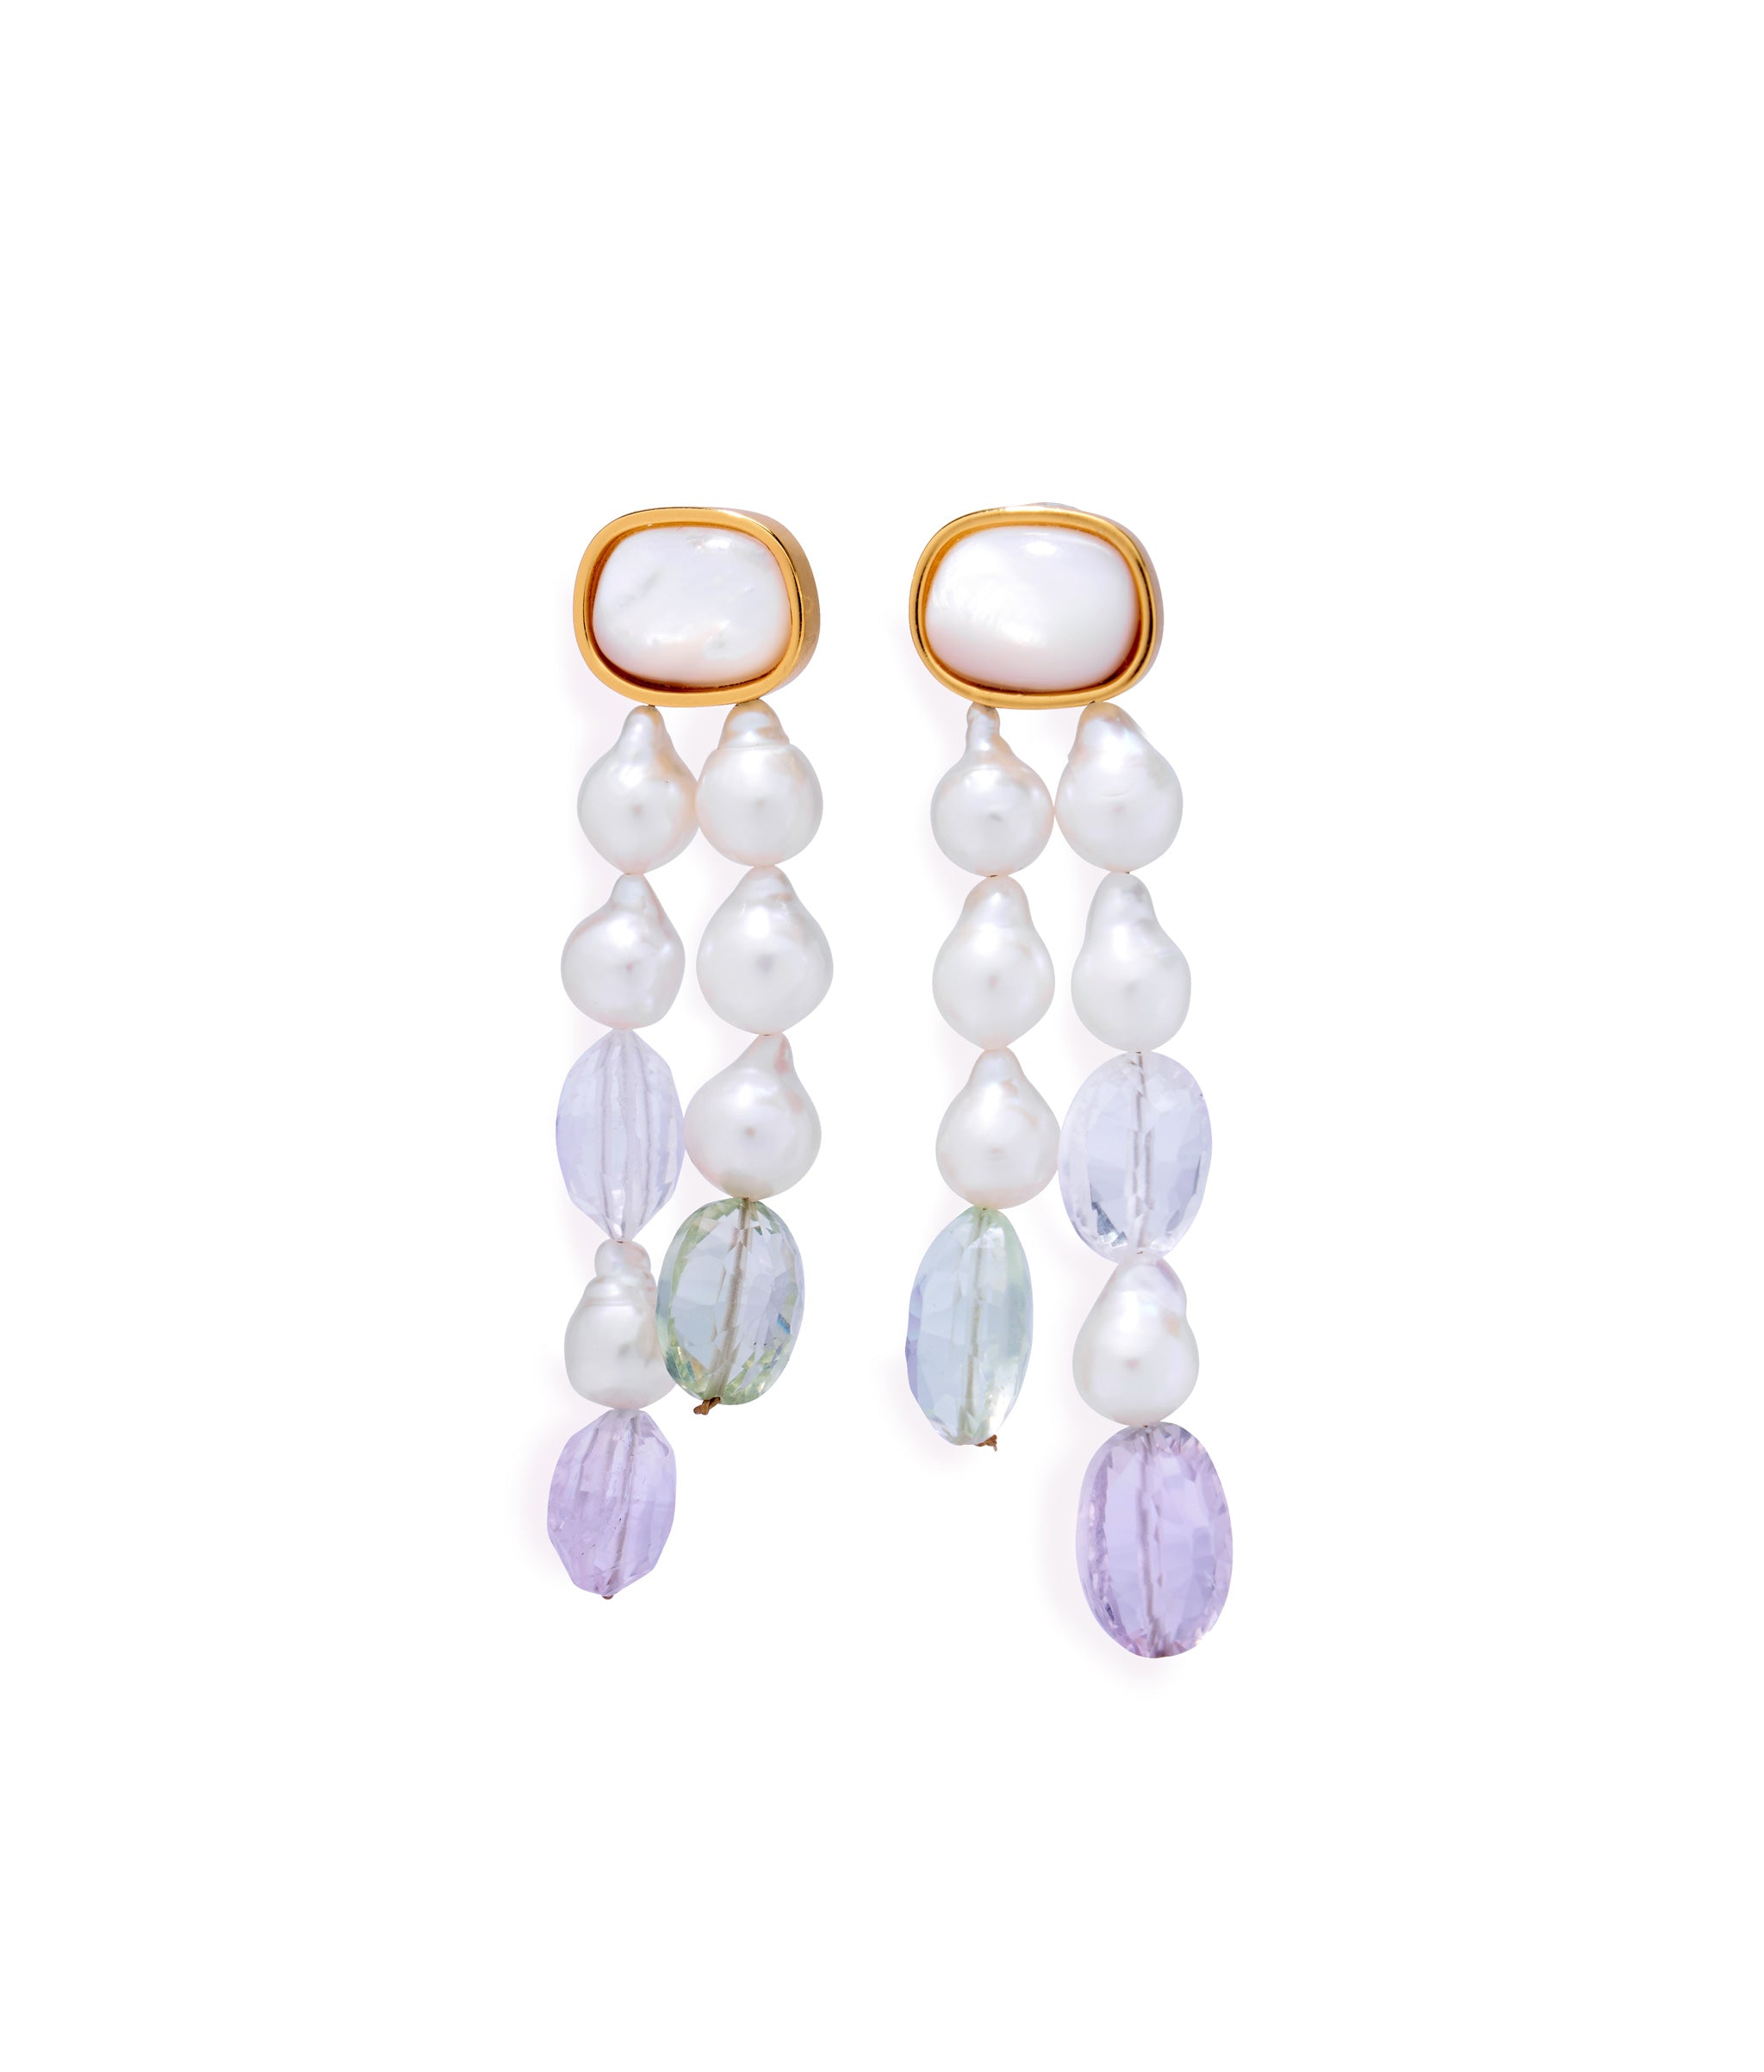 Pearl Holiday Earrings. With other-of-pearl tops and hanging quartz, green amethyst and pink amethyst stones and pearls.Pearl Holiday Earrings. With mother-of-pearl tops and hanging double strands of quartz, green + pink amethyst and pearls